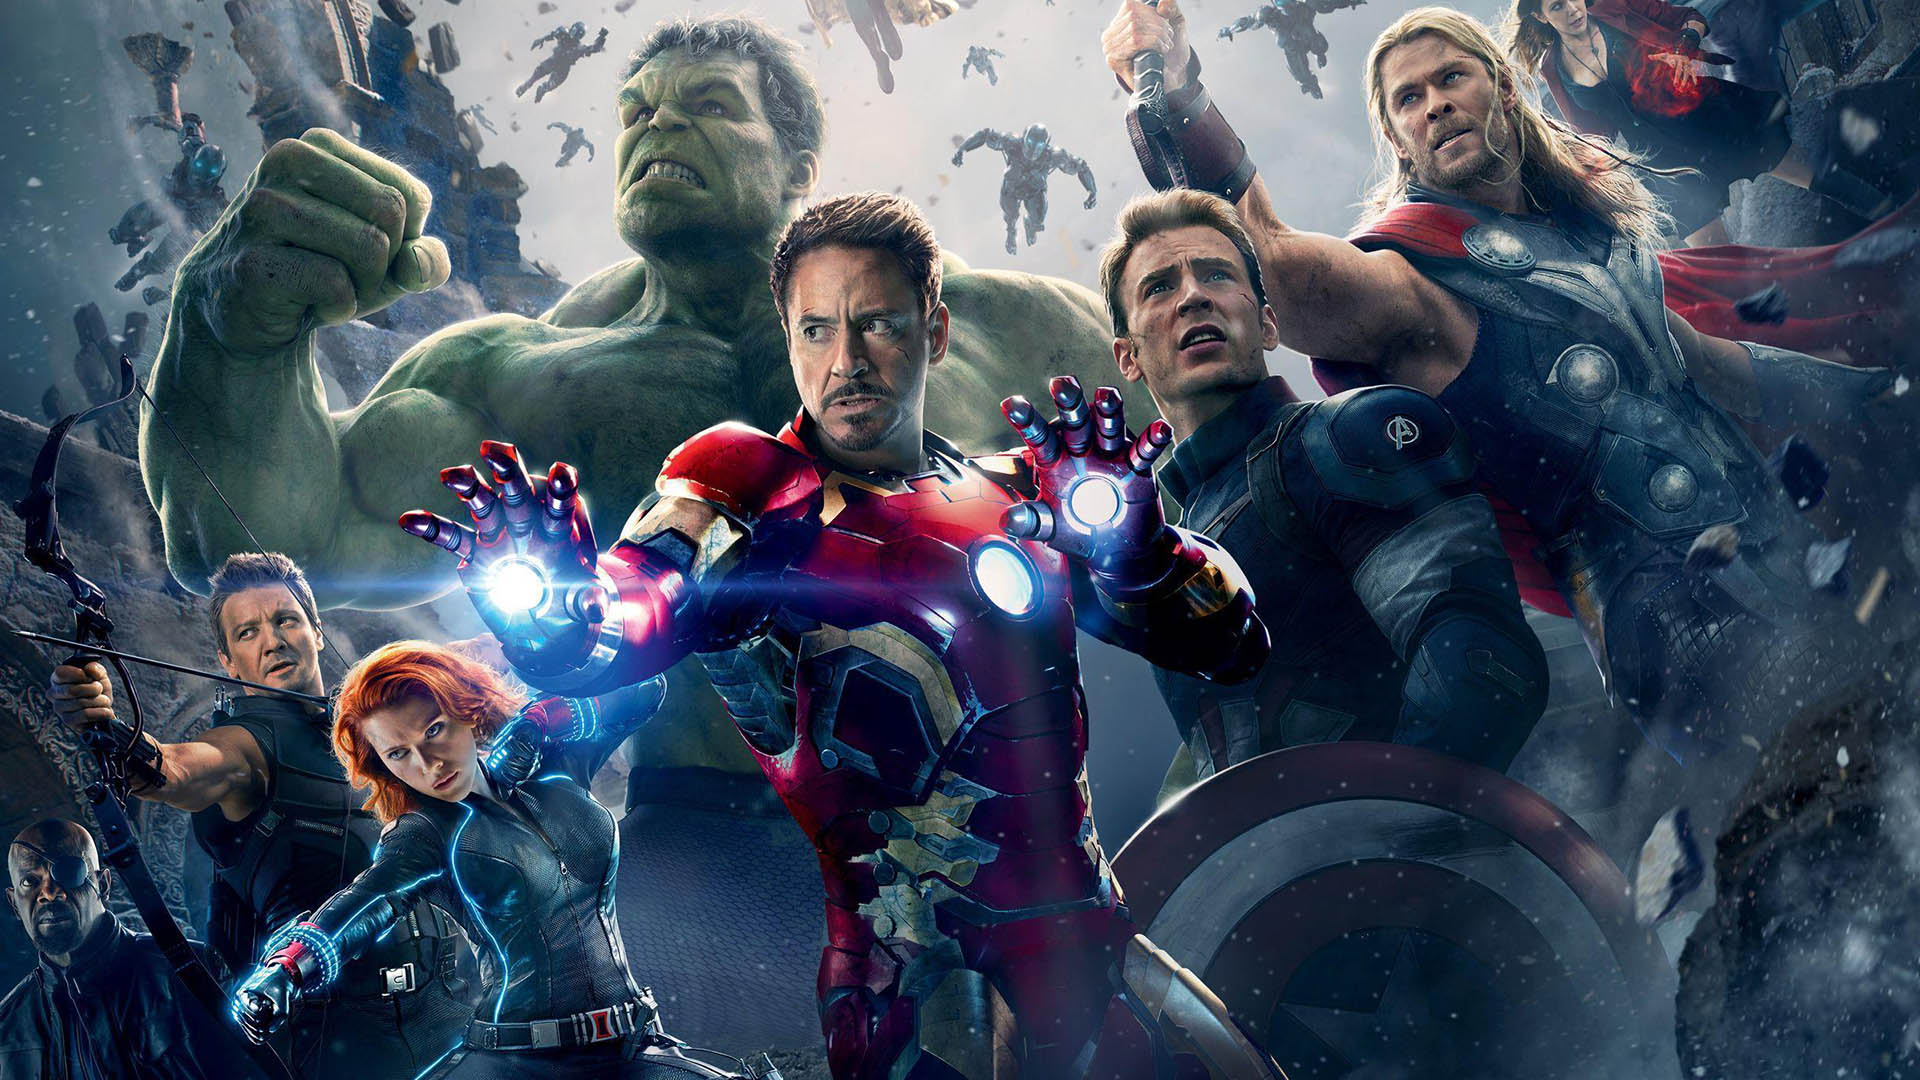 Can The Avengers Save the Marvel Cinematic Universe?